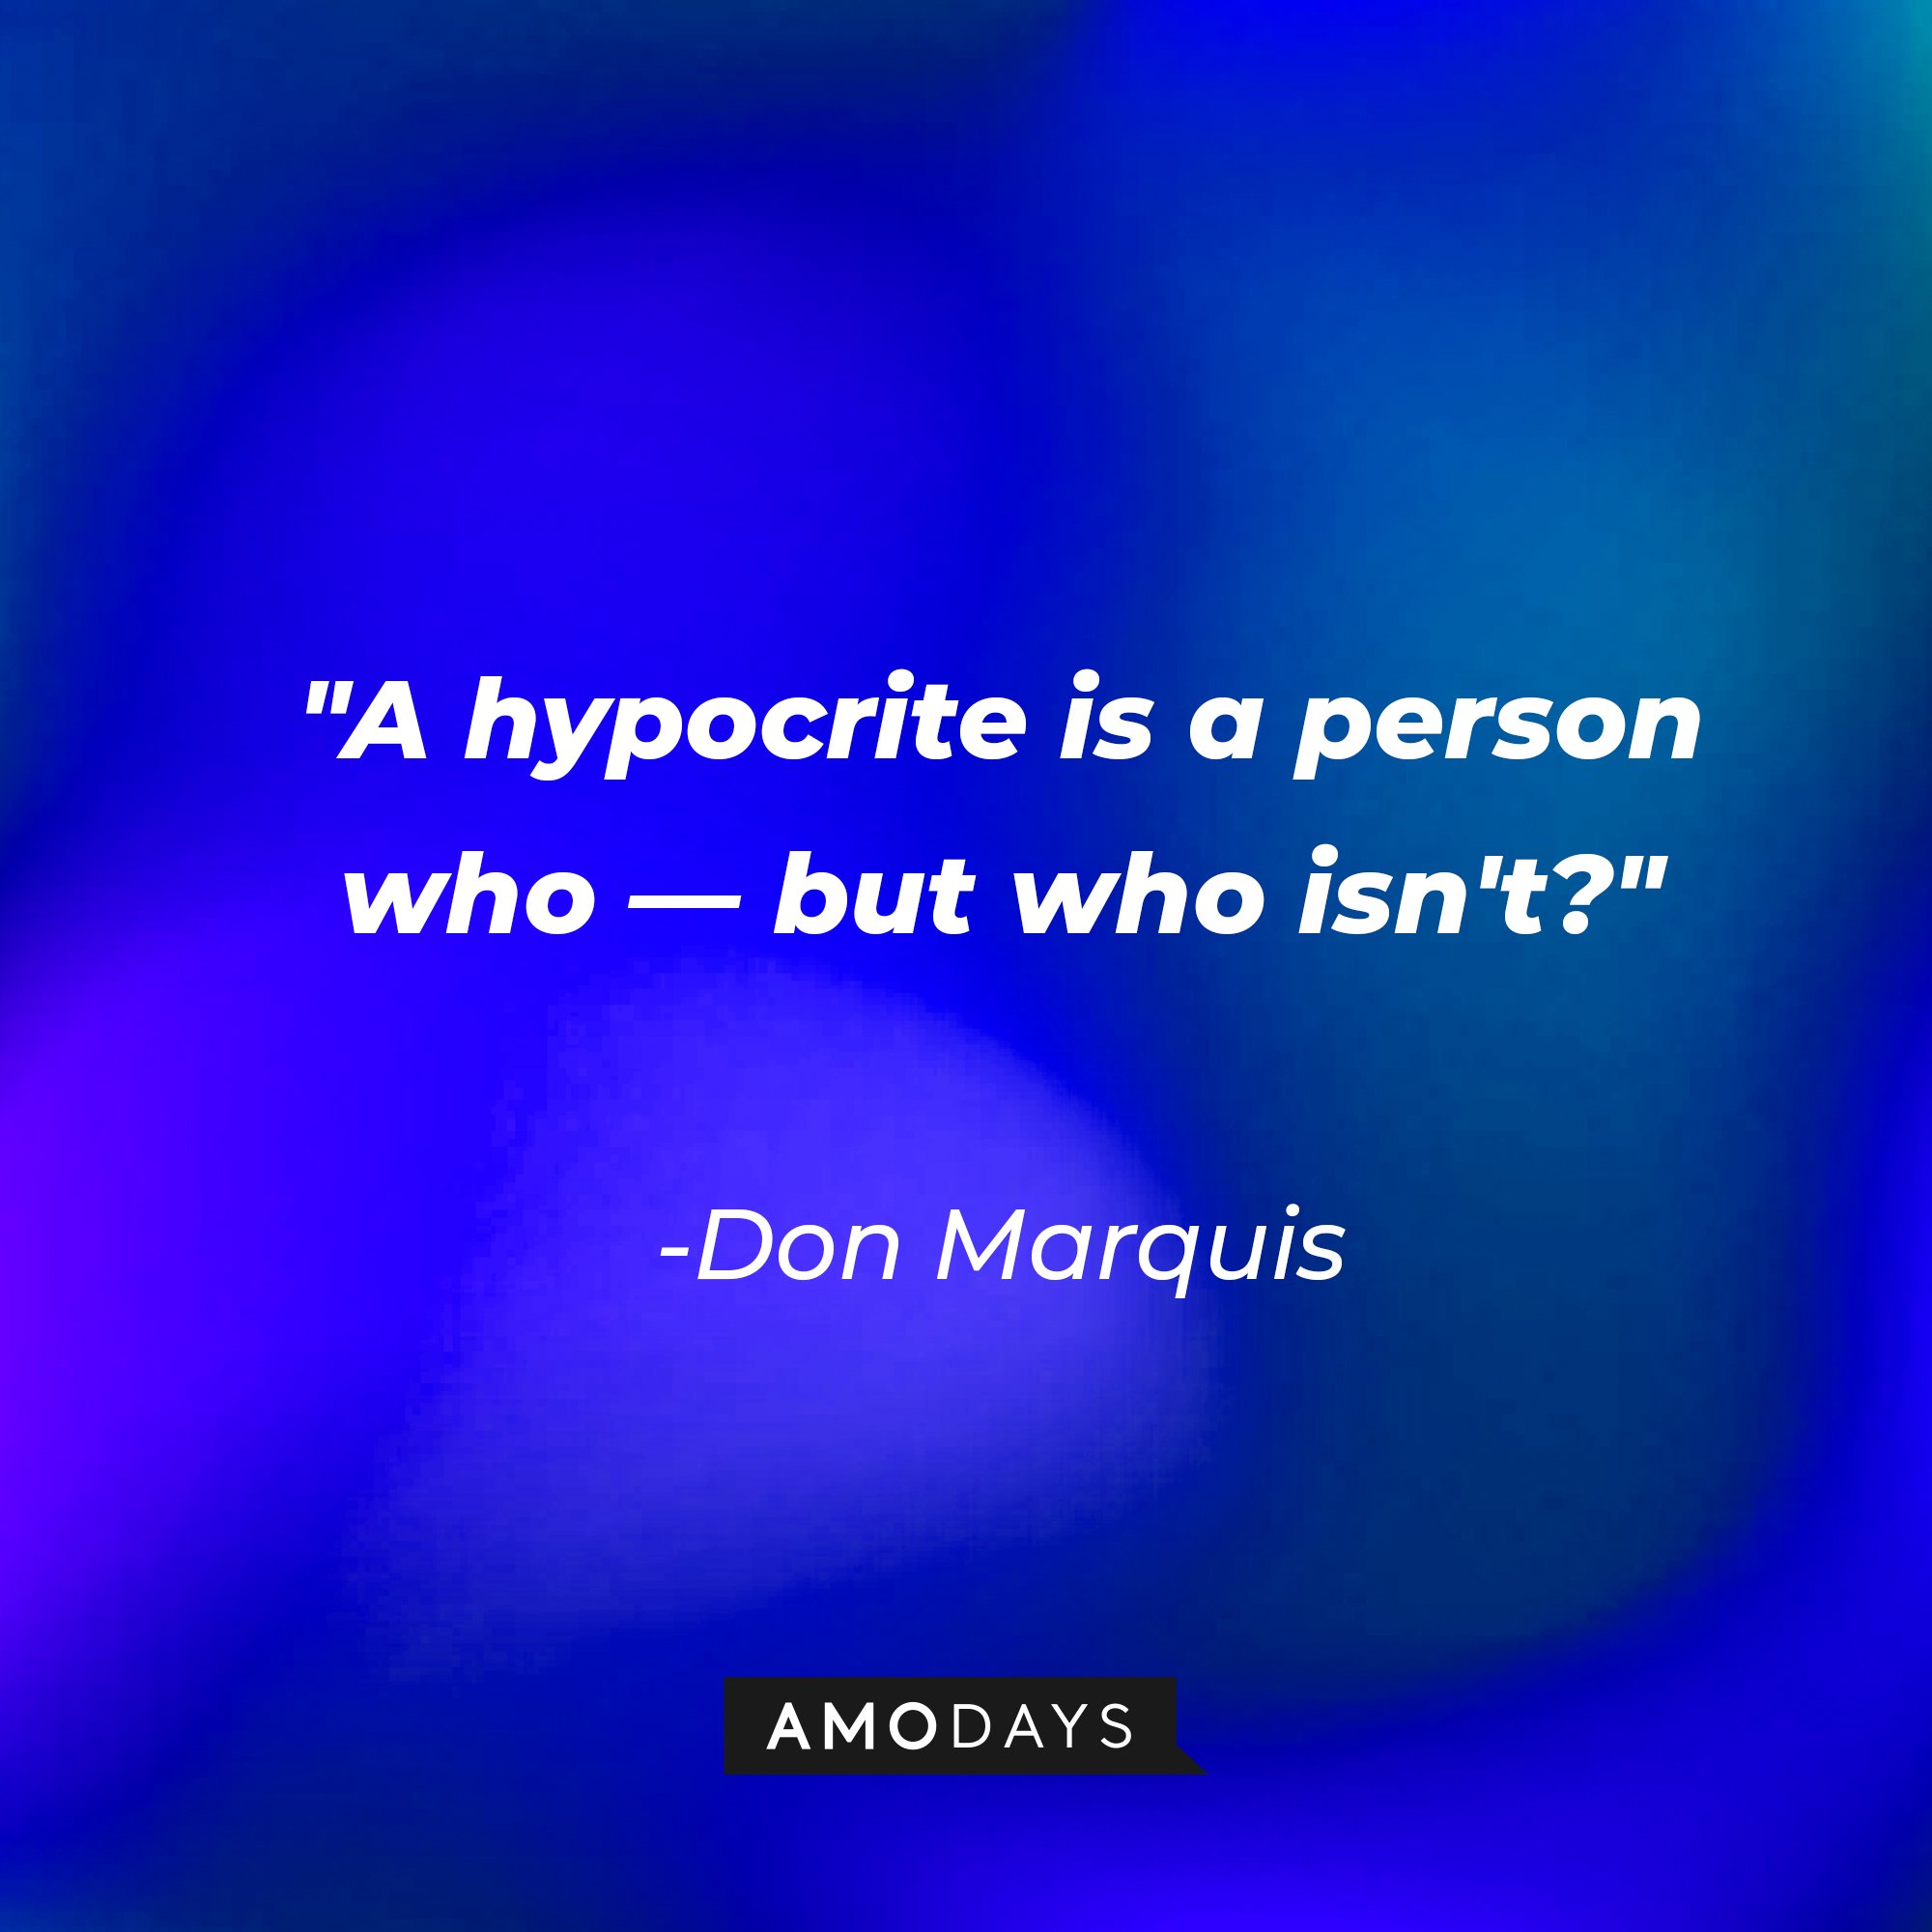 Don Marquis' quote:\\\\\\\\\\\\\\\\u00a0"A hypocrite is a person who — but who isn't?"\\\\\\\\\\\\\\\\u00a0| Image: AmoDays